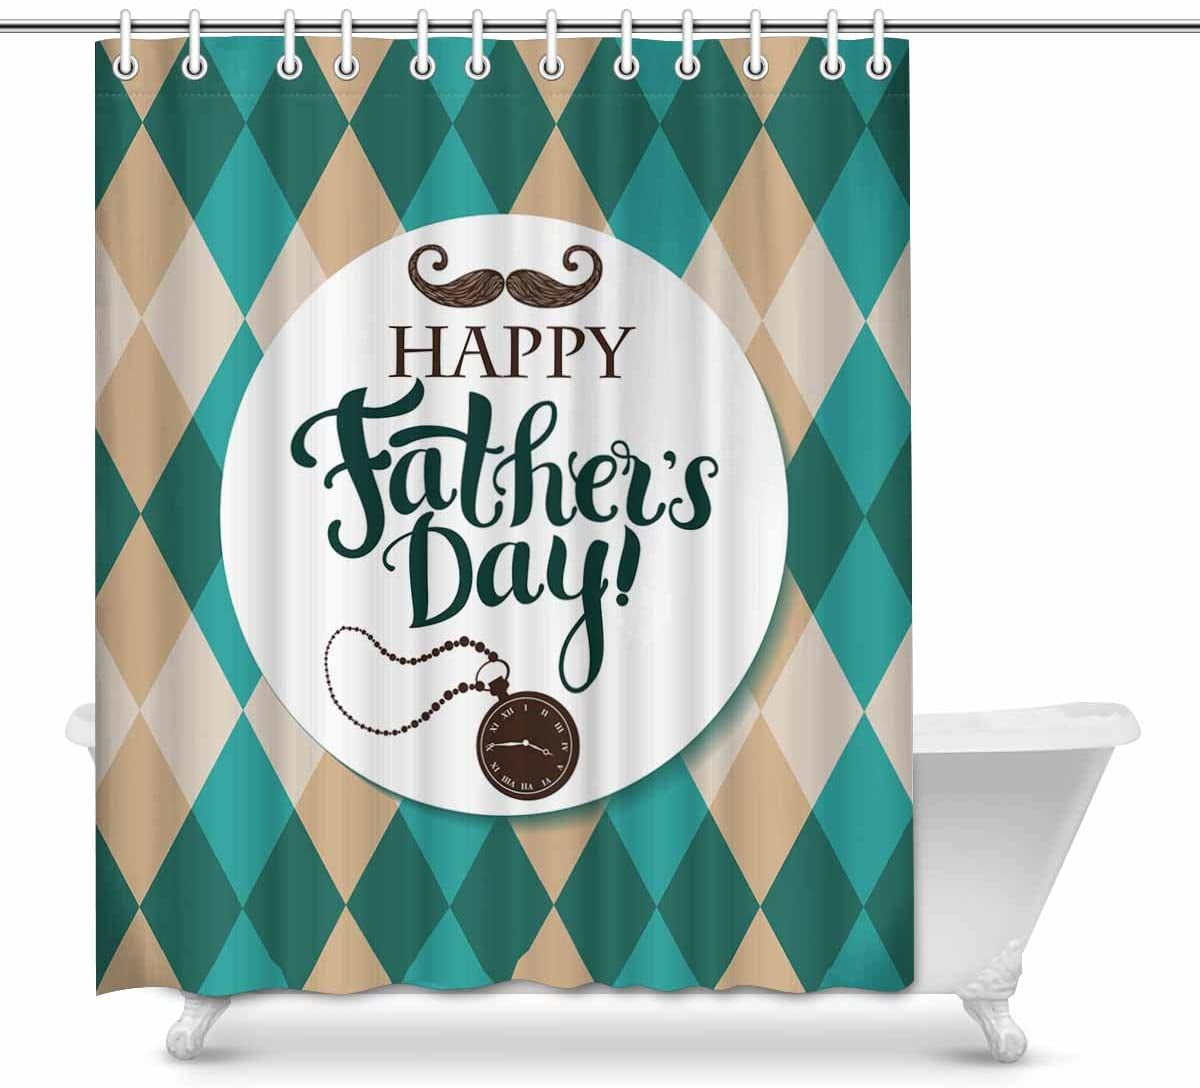 Happy Fathers Day Shower Curtain Liner Bathroom Polyester Waterproof Fabric Hook 